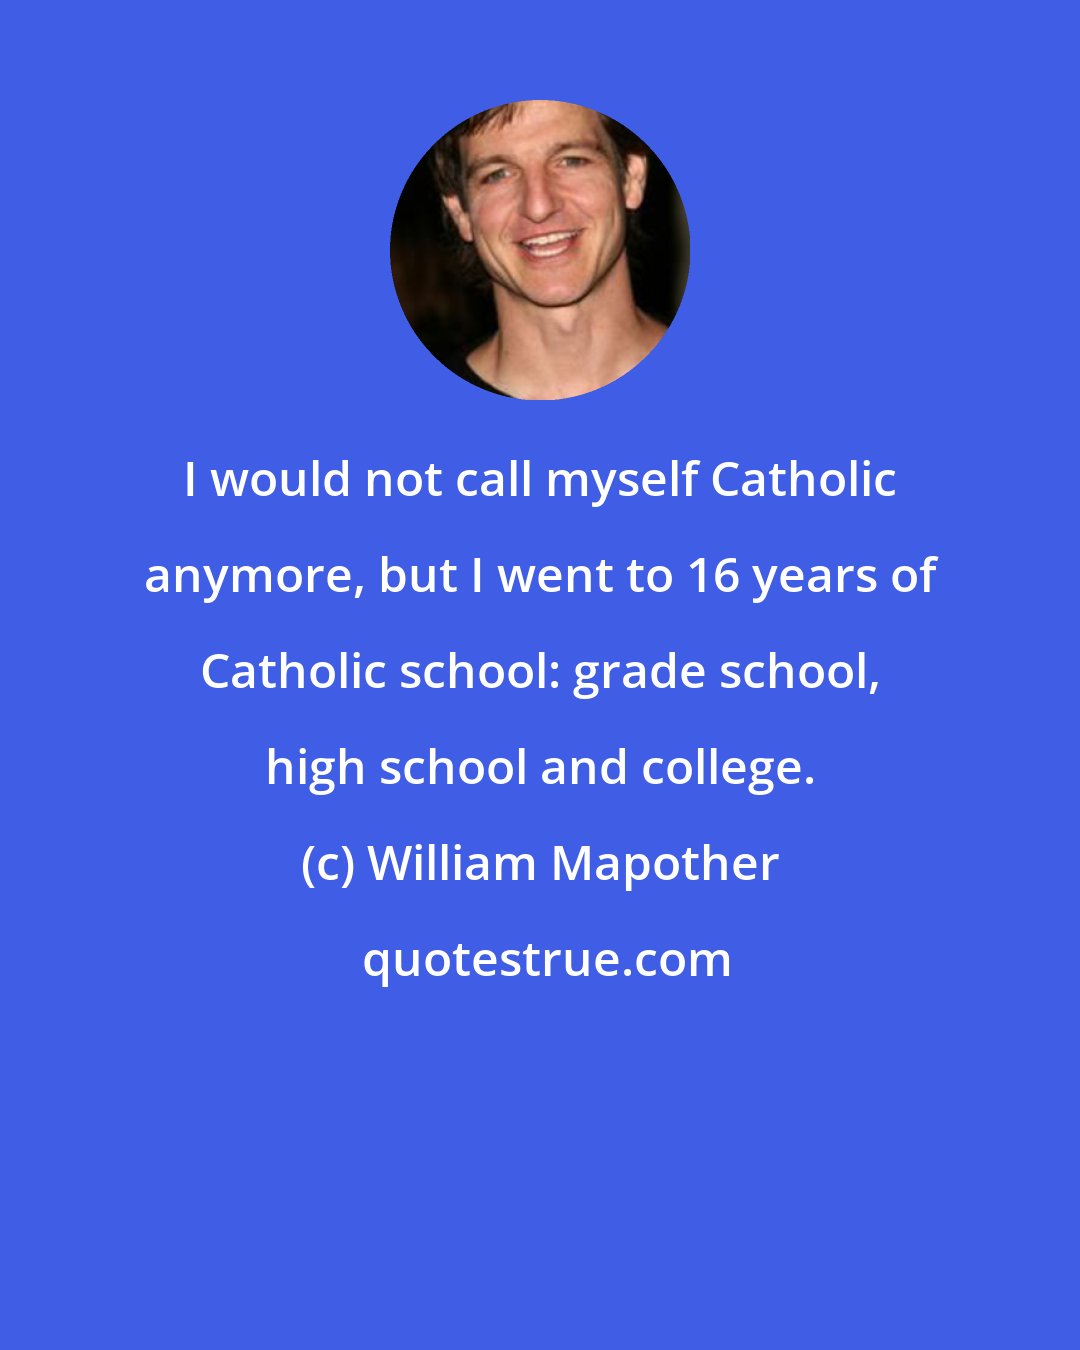 William Mapother: I would not call myself Catholic anymore, but I went to 16 years of Catholic school: grade school, high school and college.